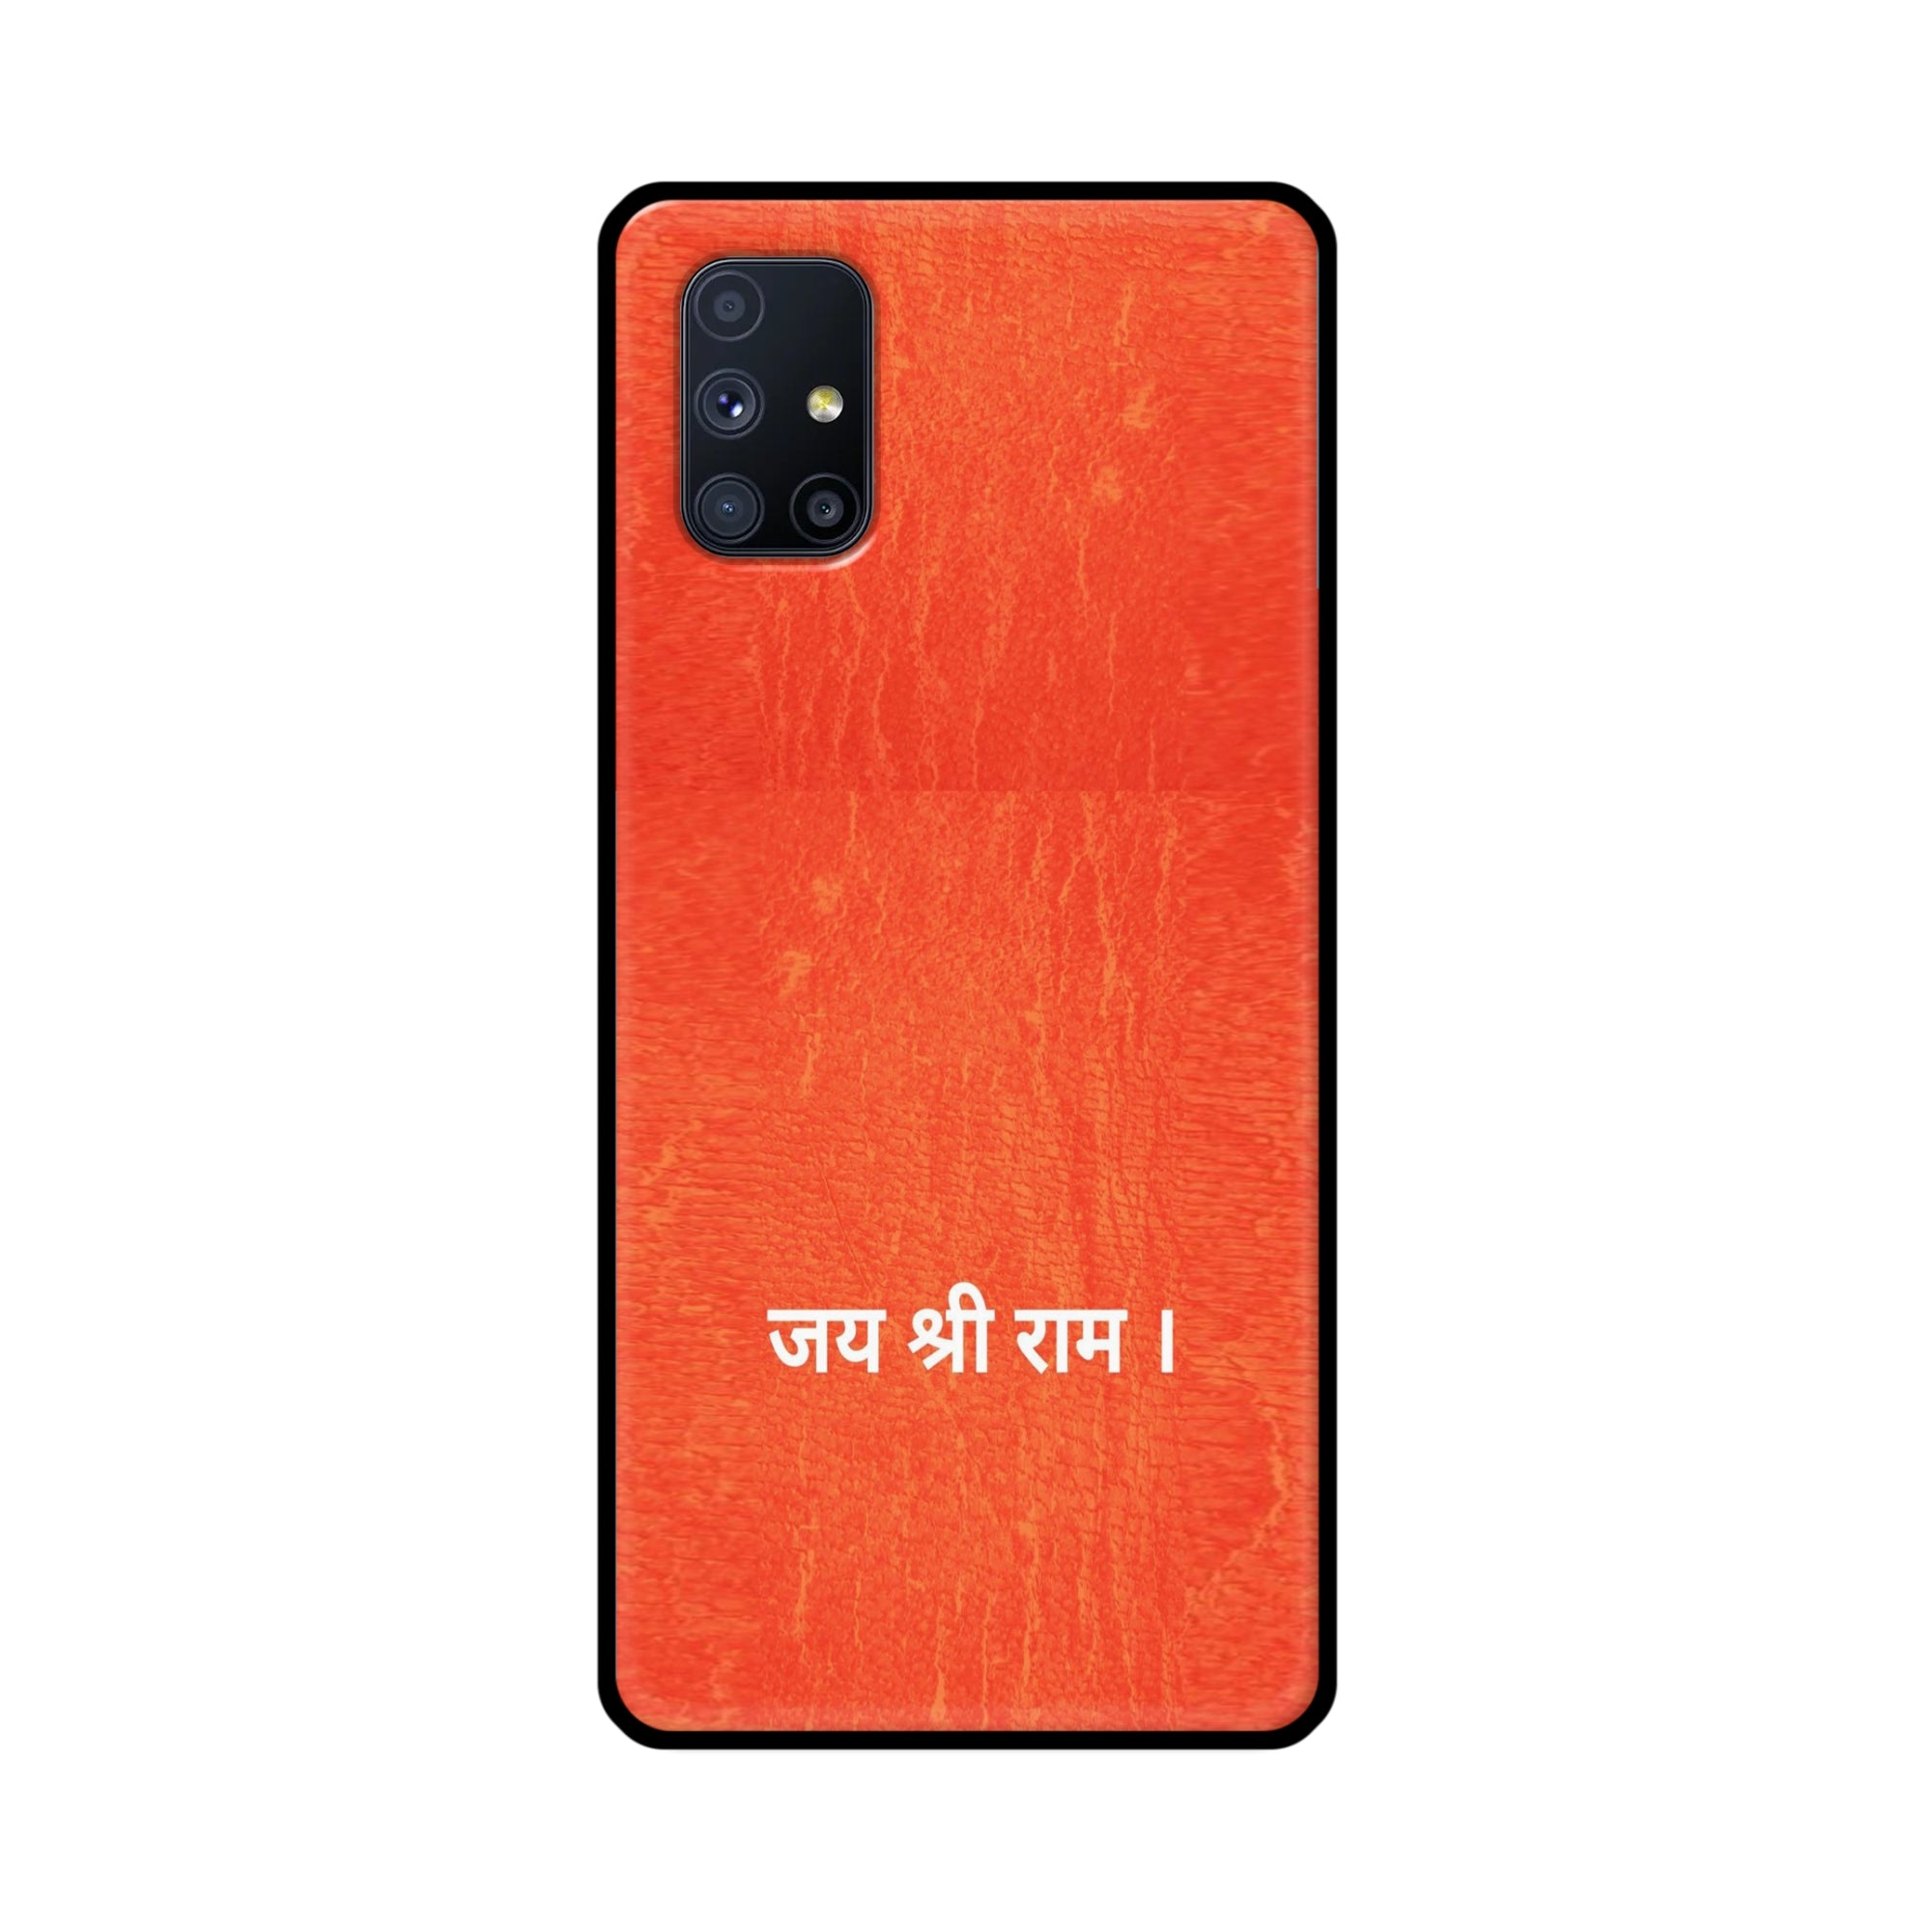 Buy Jai Shree Ram Metal-Silicon Back Mobile Phone Case/Cover For Samsung Galaxy M51 Online